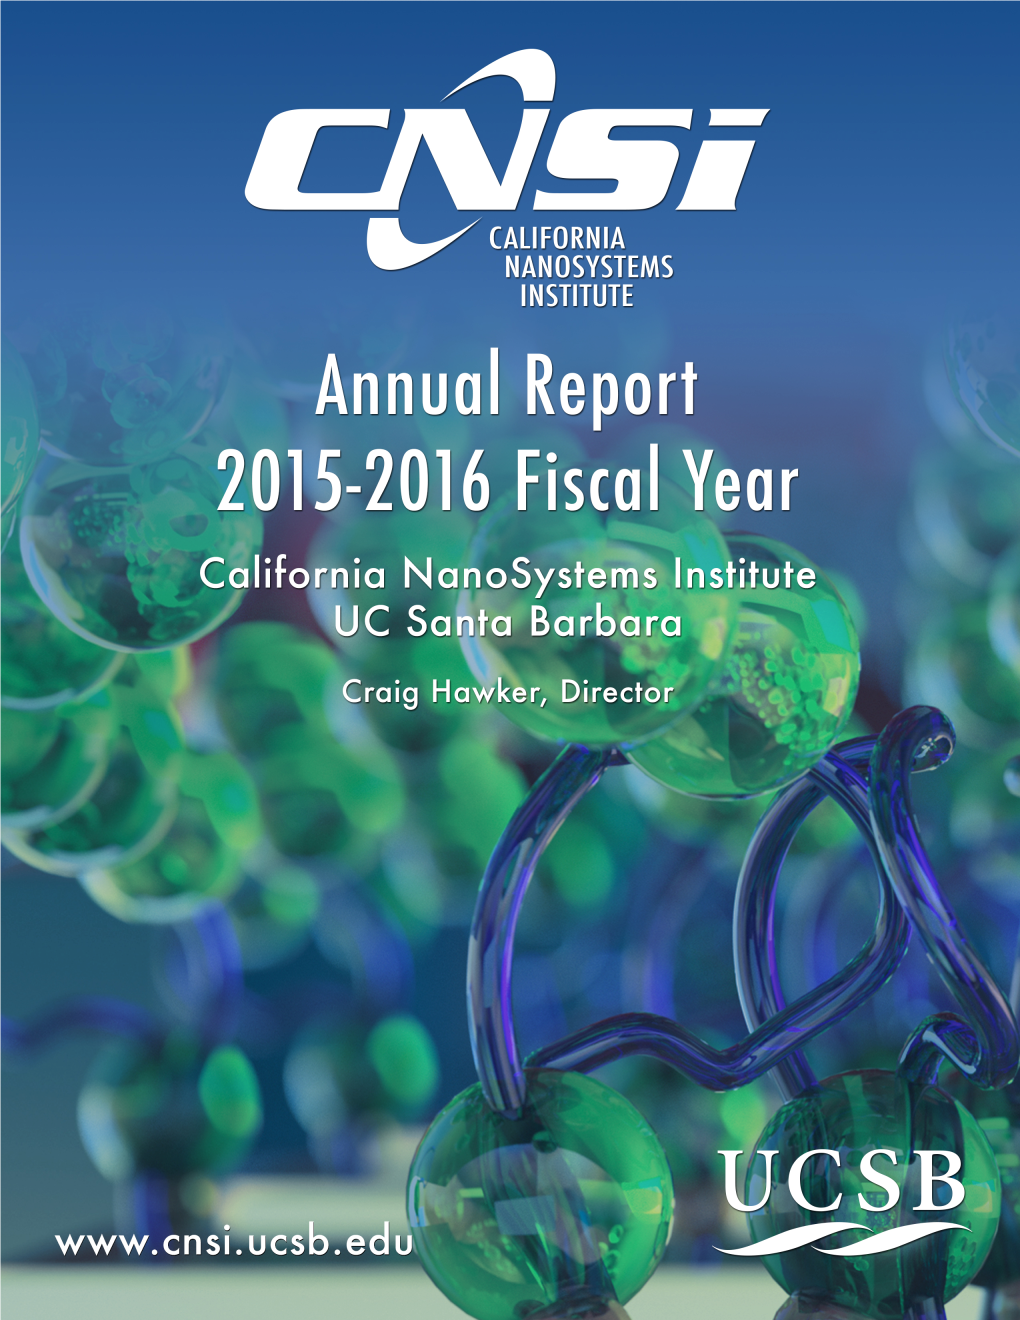 CNSI Annual Report - 2015-2016 Fiscal Year 1